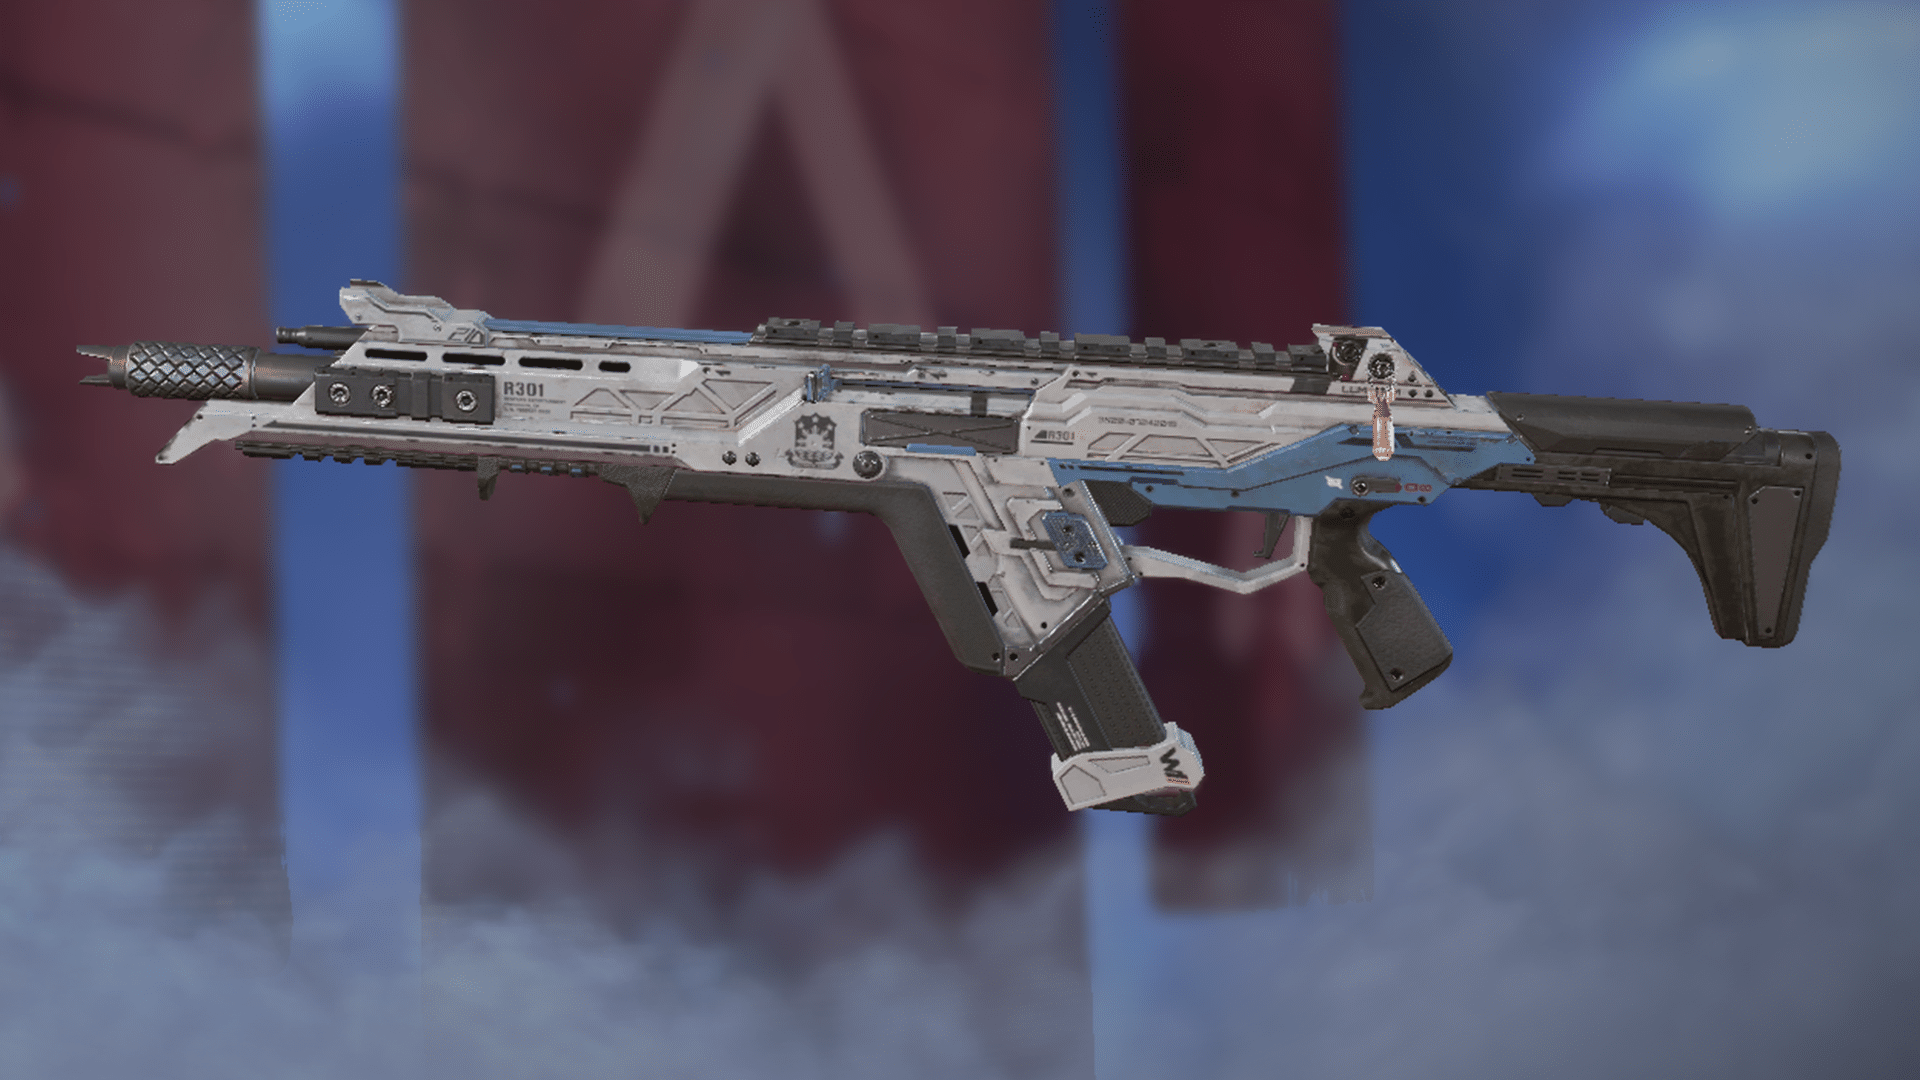 An image of the R-301 Carbine in Apex Legends.